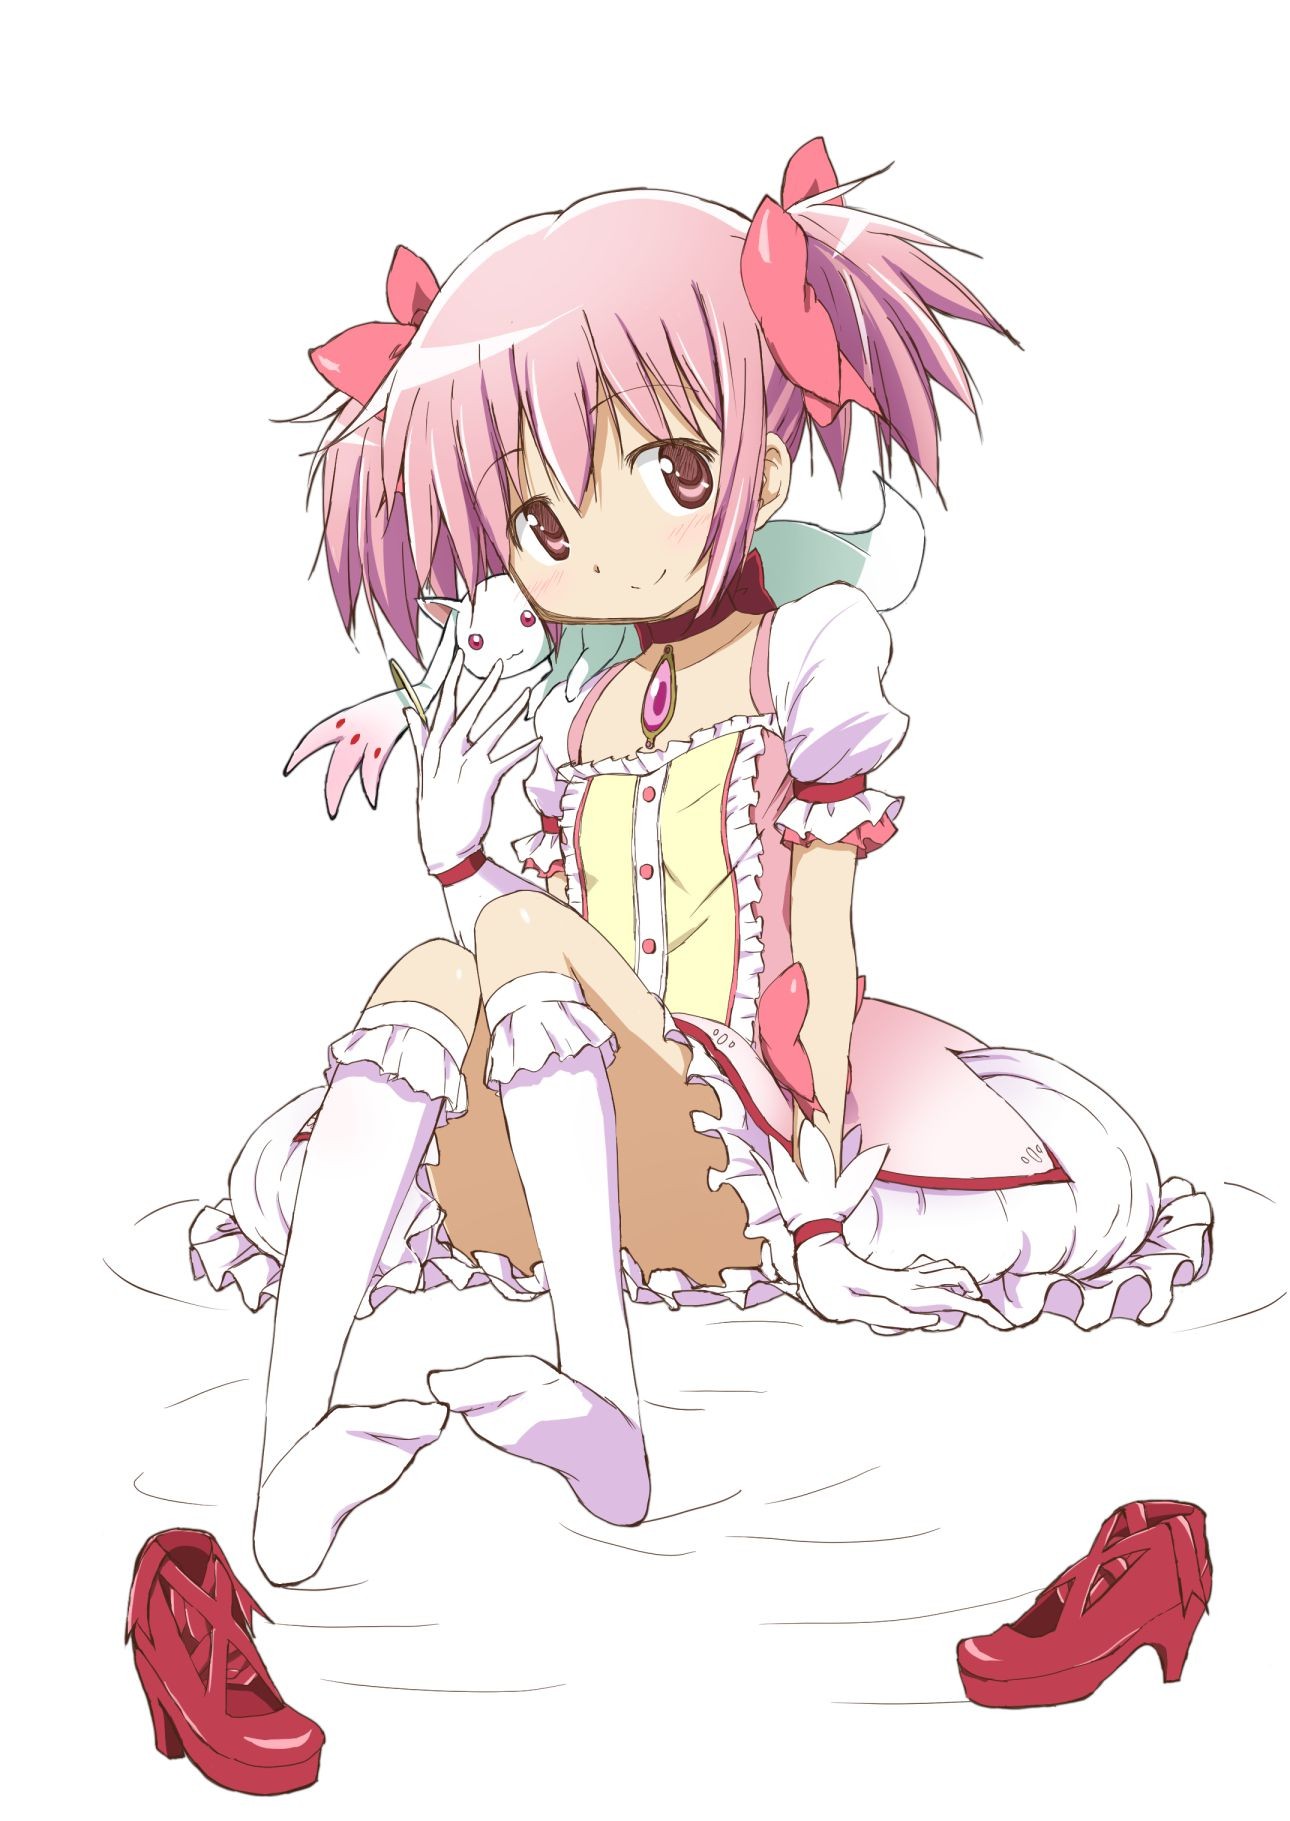 Best Blowjob Kaname Madoka "I Do Not See It With Naughty Eyes Because It Is A Magical Girl..." ← This W, W, W Double Penetration